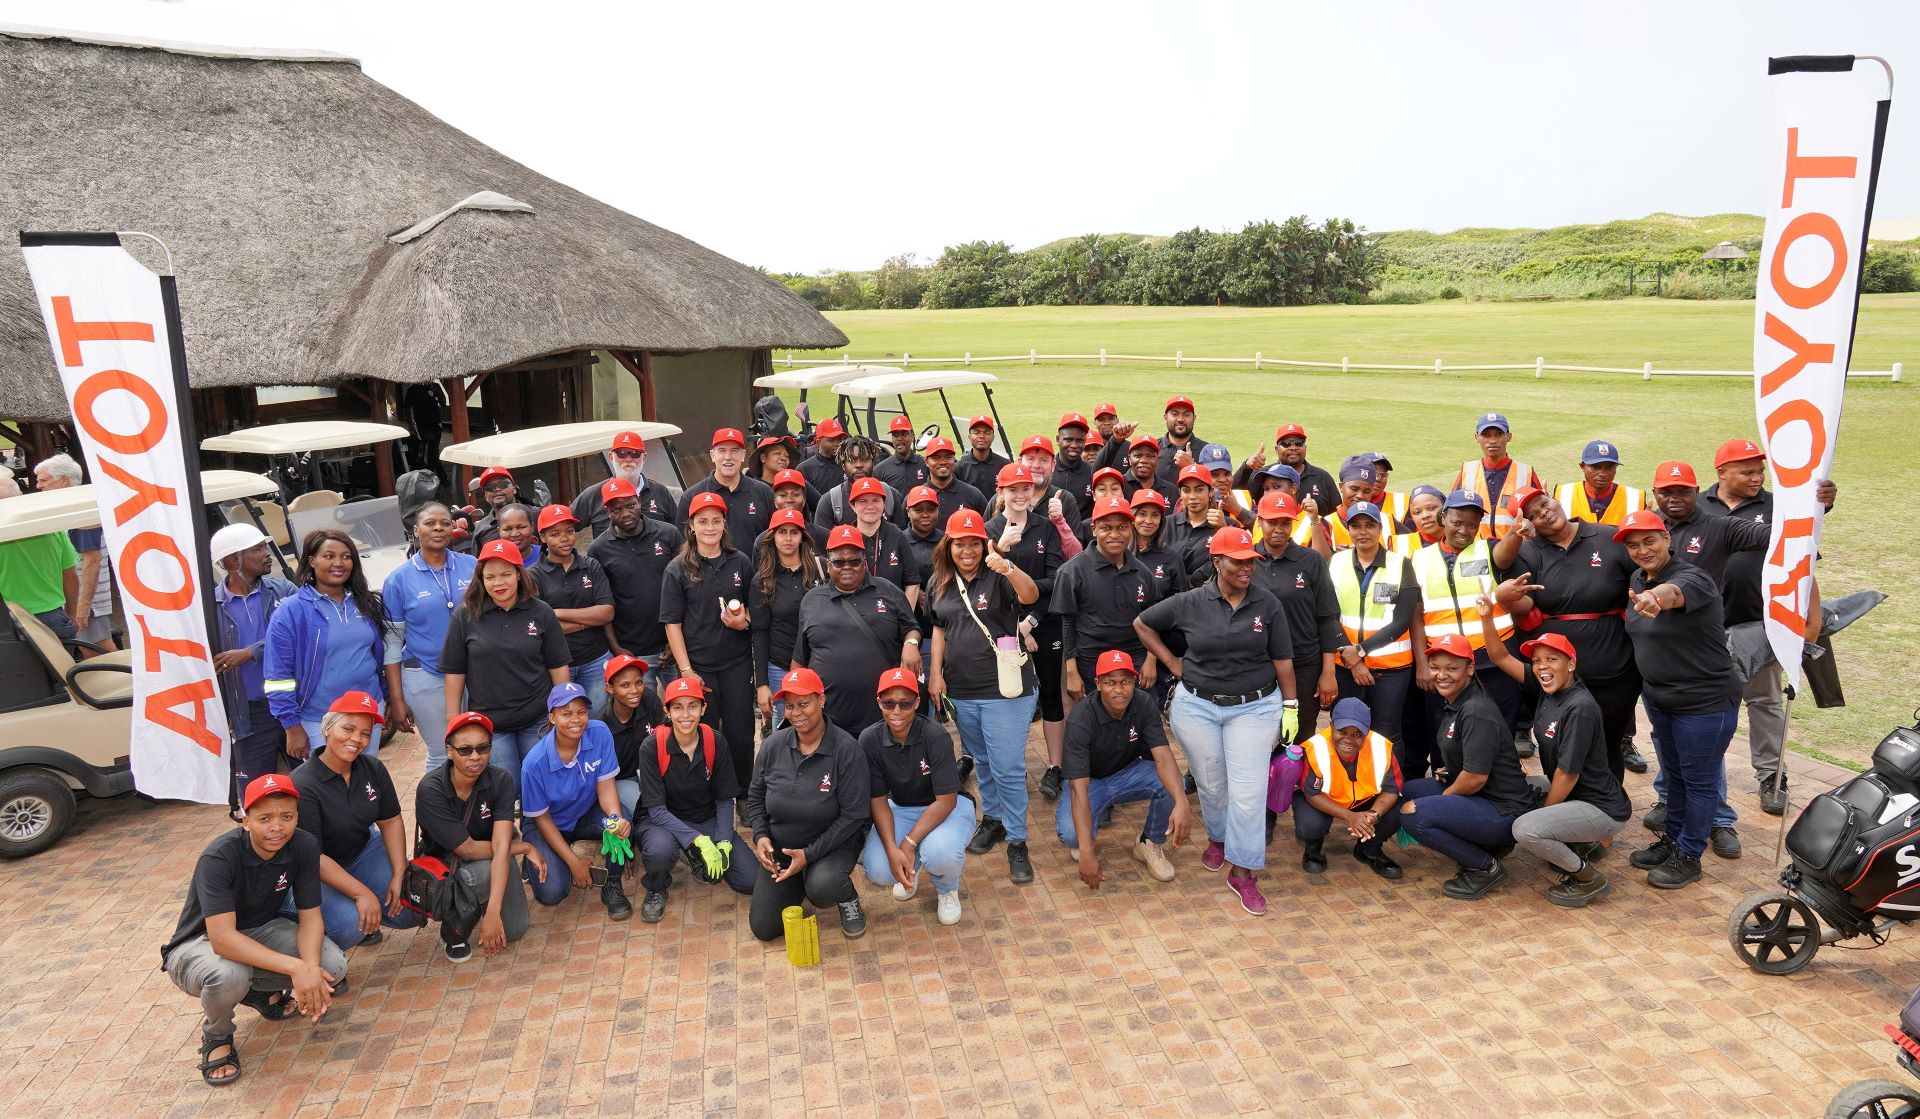 Toyota South Africa Motors Leads Beach Clean-Up Effort in Partnership with Clean Surf NGO